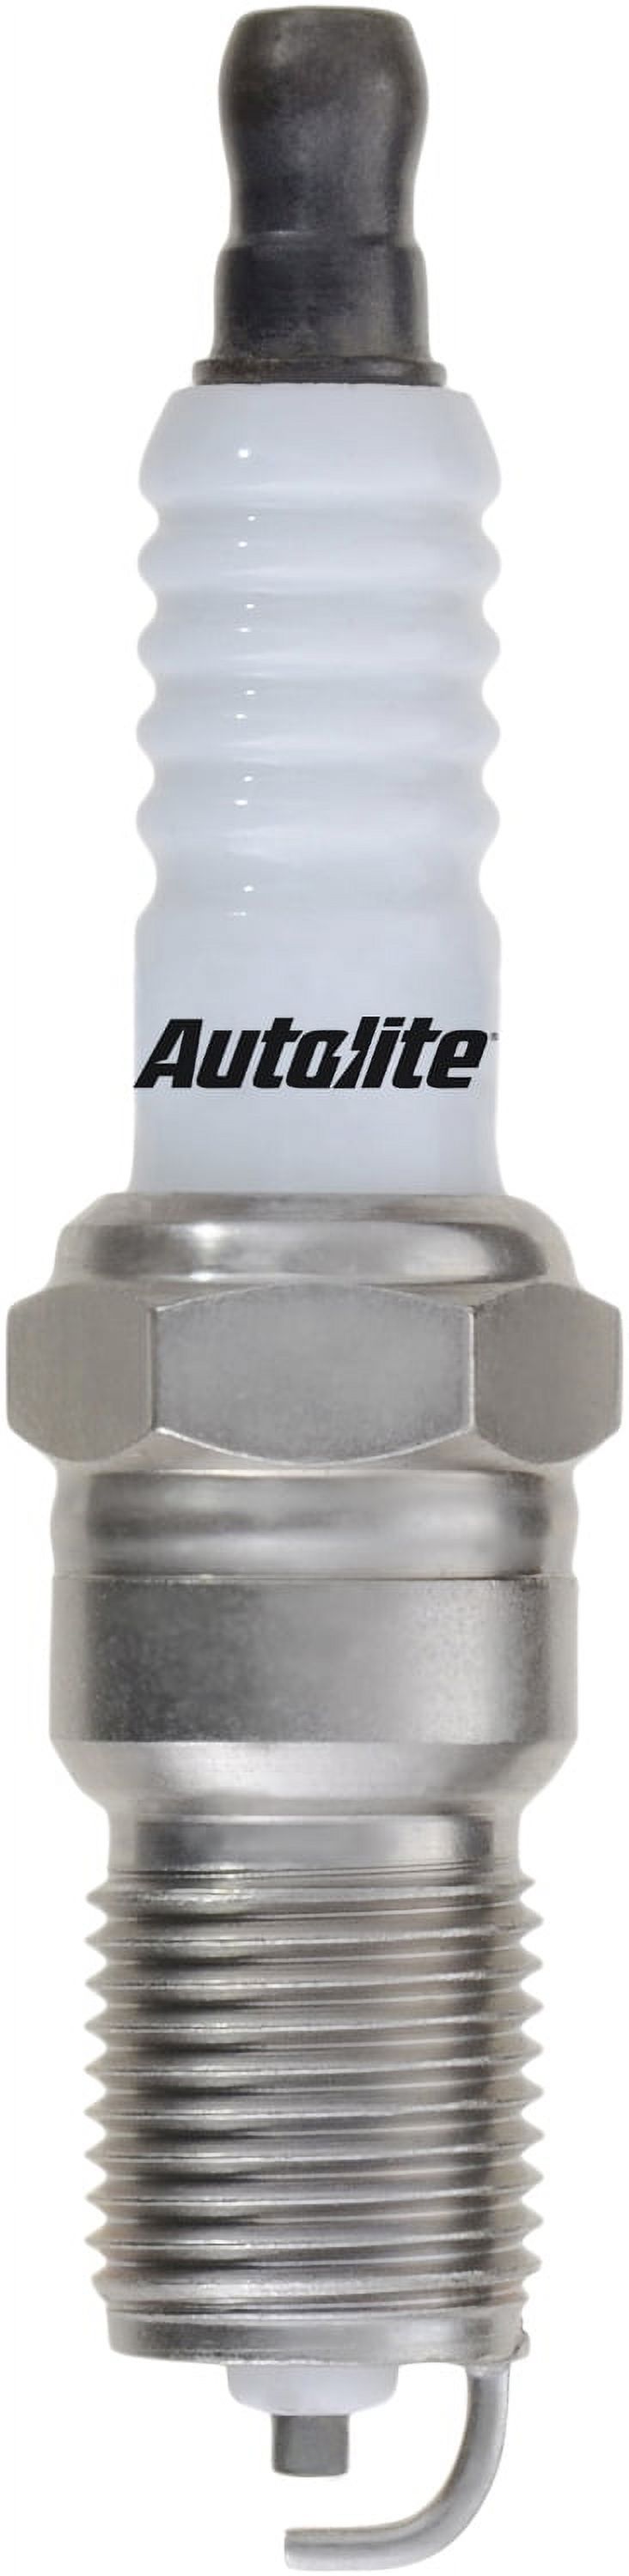 Autolite 104 Copper Spark Plug Fits select: 1997-2010 FORD F150, 2004-2011 FORD FOCUS - image 1 of 2